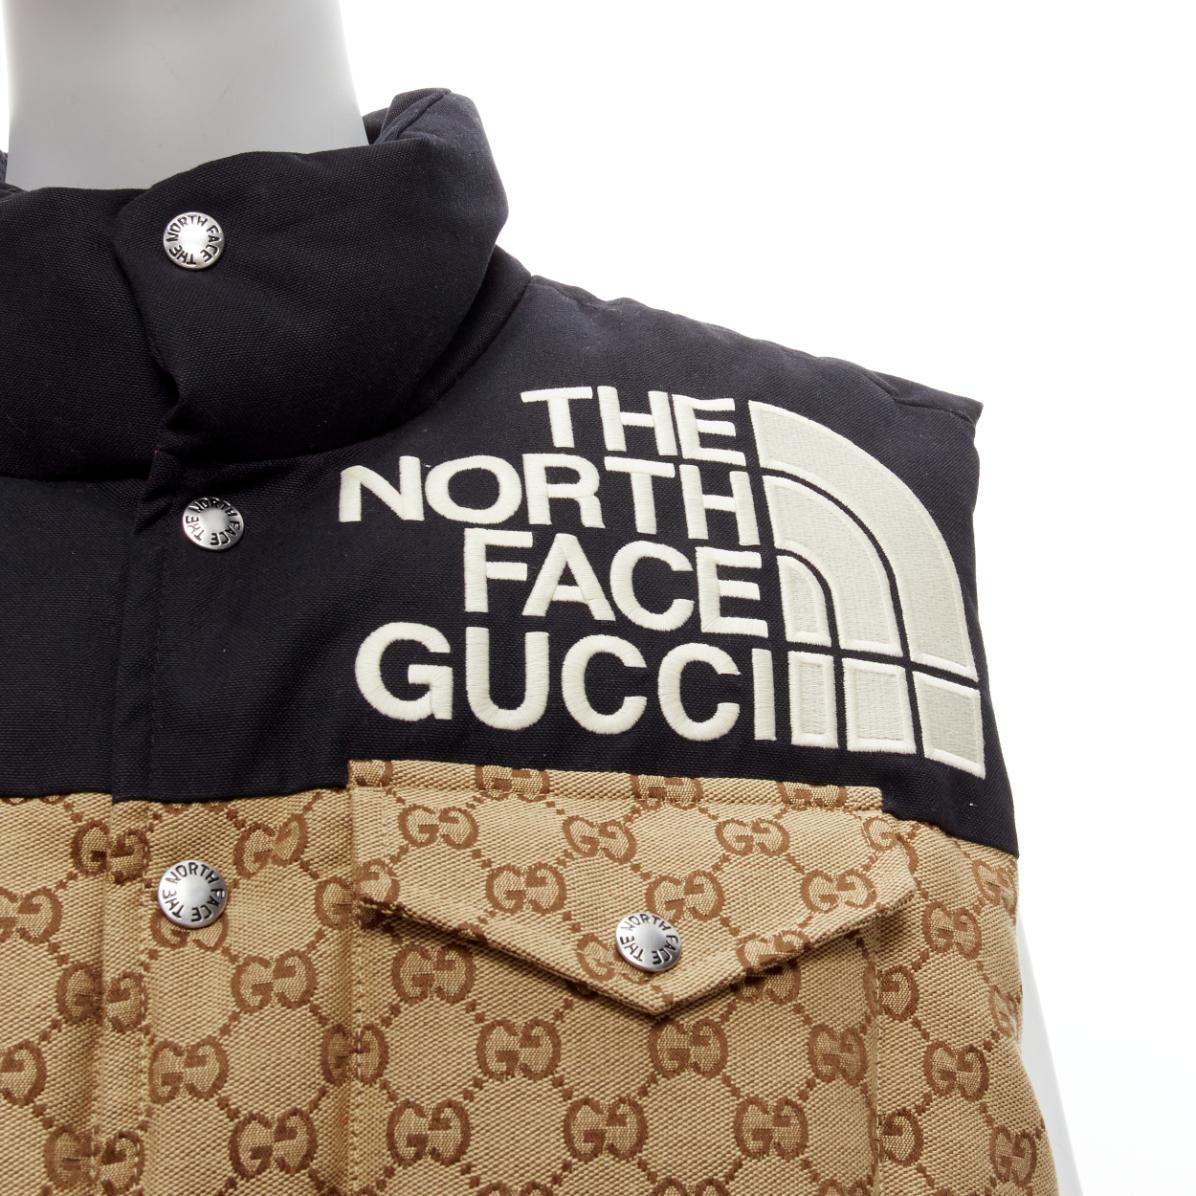 GUCCI THE NORTH FACE black beige big logo GG monogram padded vest jacket IT40 S
Reference: LNKO/A02178
Brand: Gucci
Designer: Alessandro Michele
Collection: The North Face
Material: Cotton, Polyester
Color: Beige, Black
Pattern: Monogram
Closure: